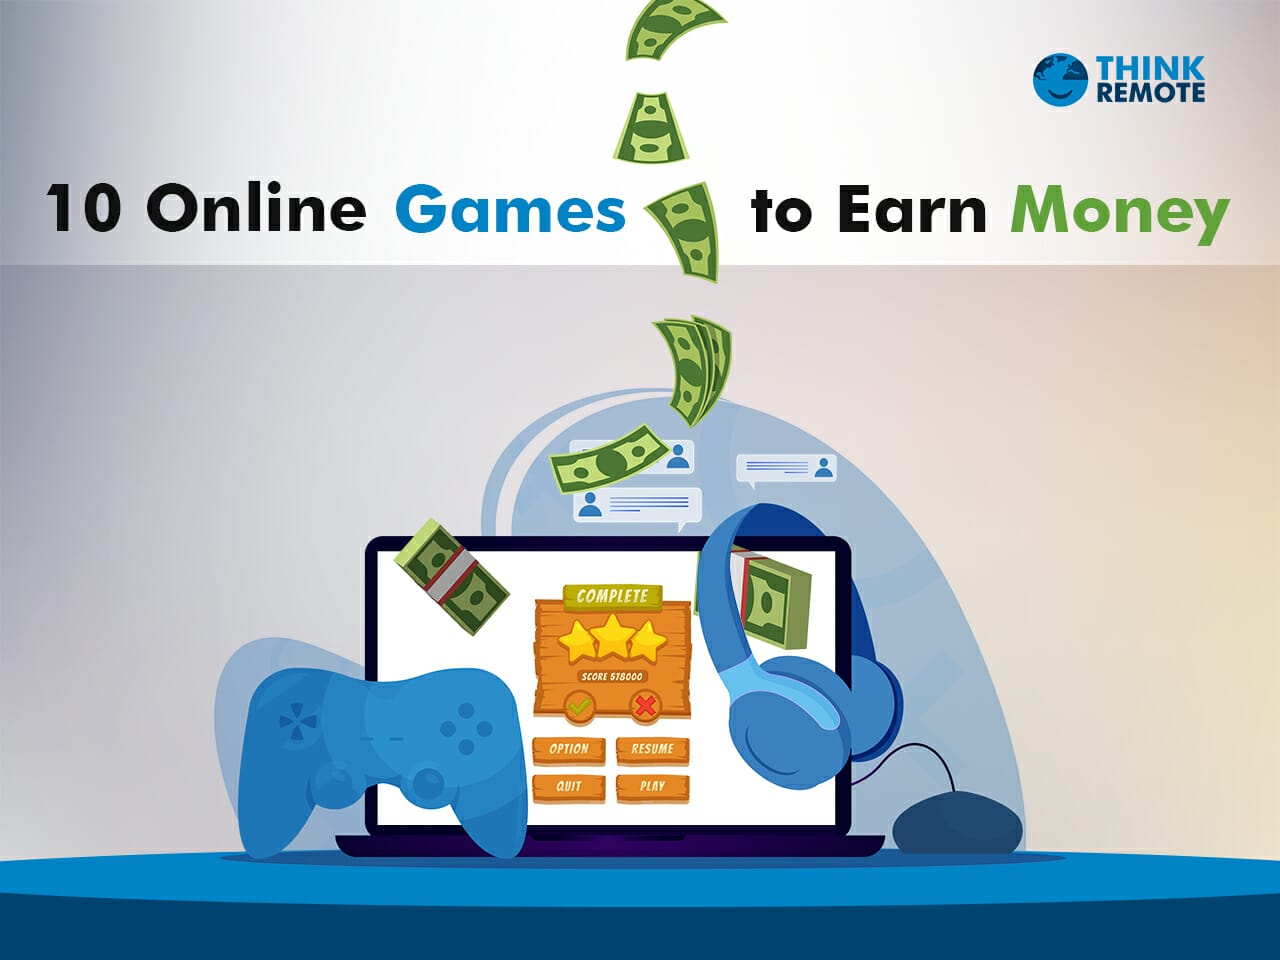 How to earn money by Playing Games Online